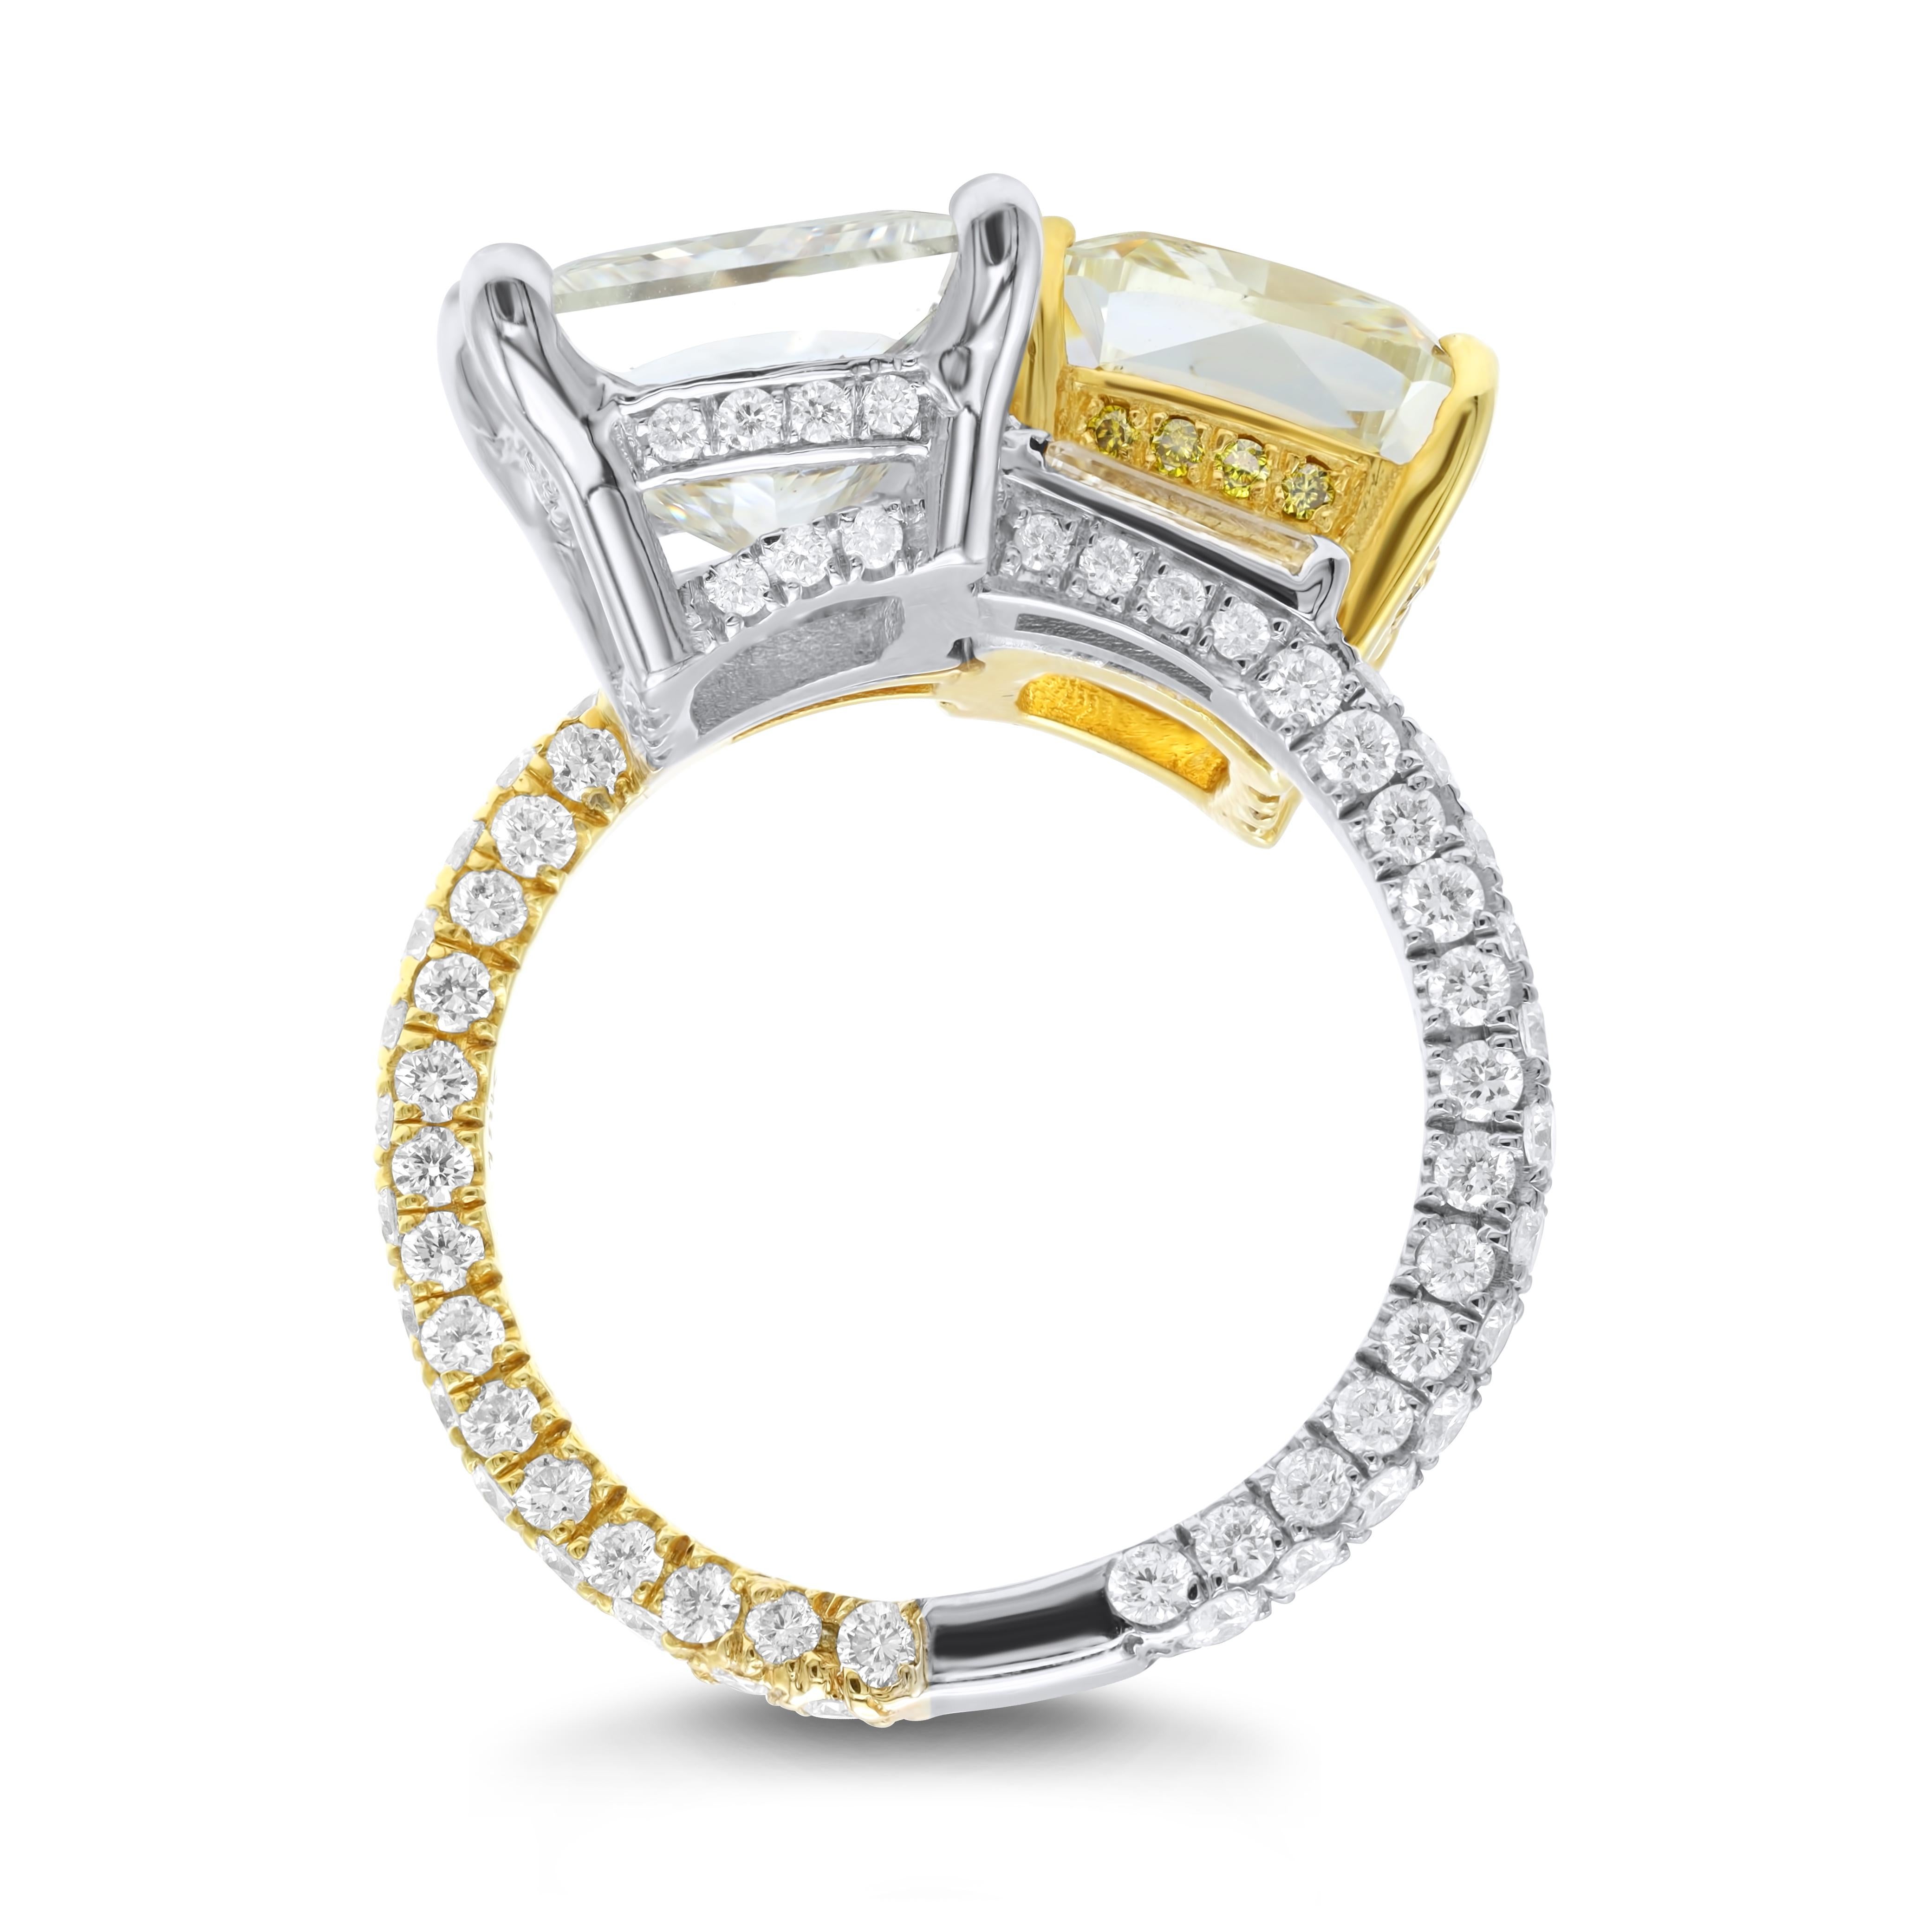 18kt GIA certified cocktail ring. This ring Features 4.01ct  princess cut I, SI1 and 5.24cts fancy light yellow Cushion cut diamond. They are surrounded by a halo setting of 1.50cts yellow and white gold.  
